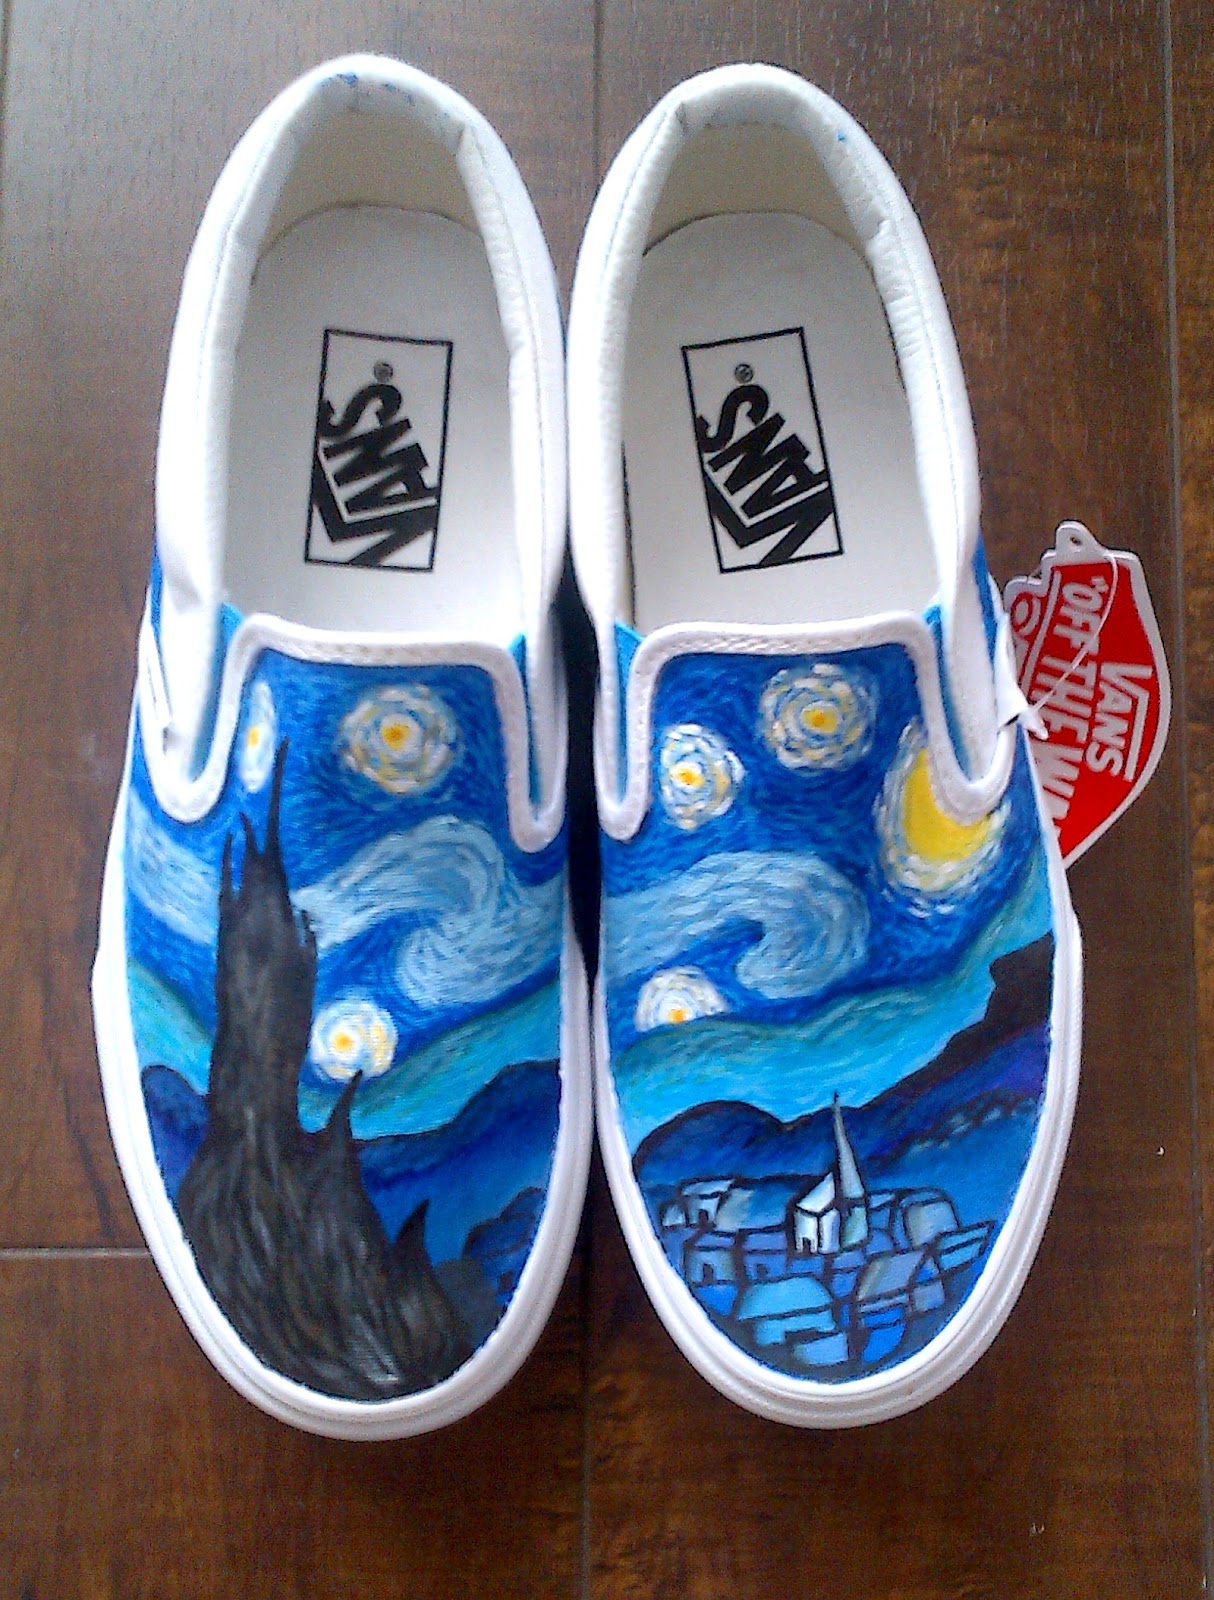 I DRAW ON SHOES.